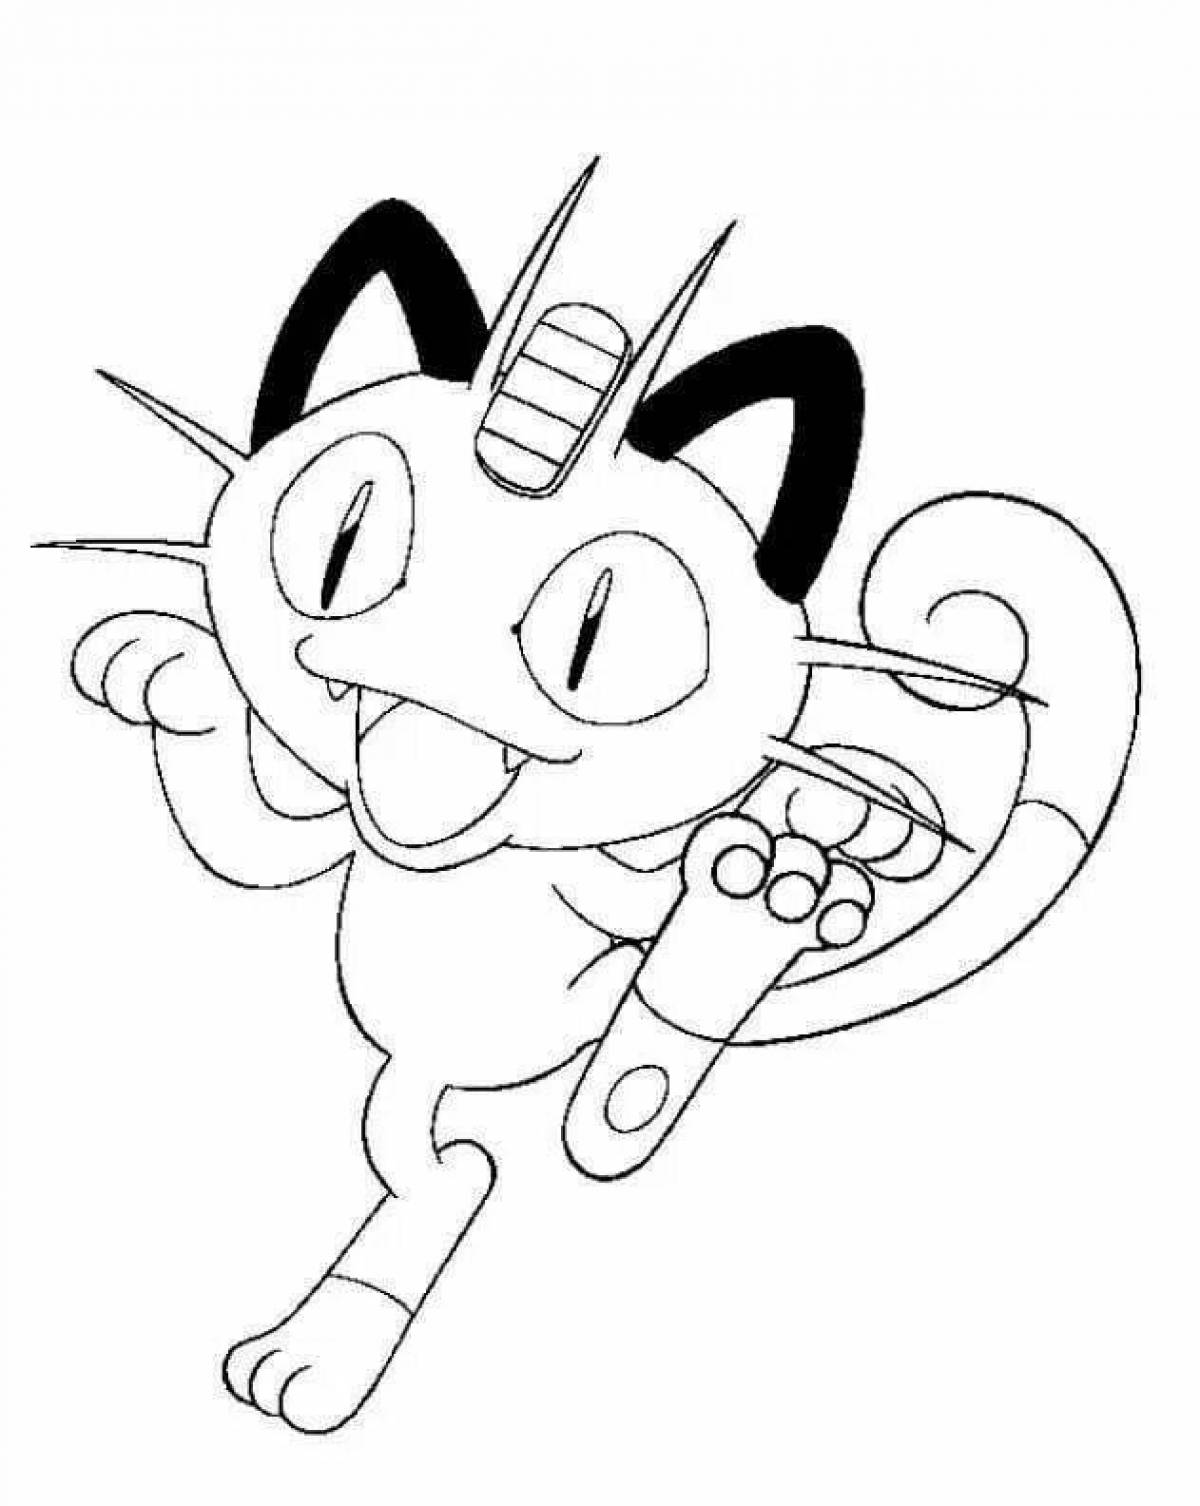 Charming meowth coloring book